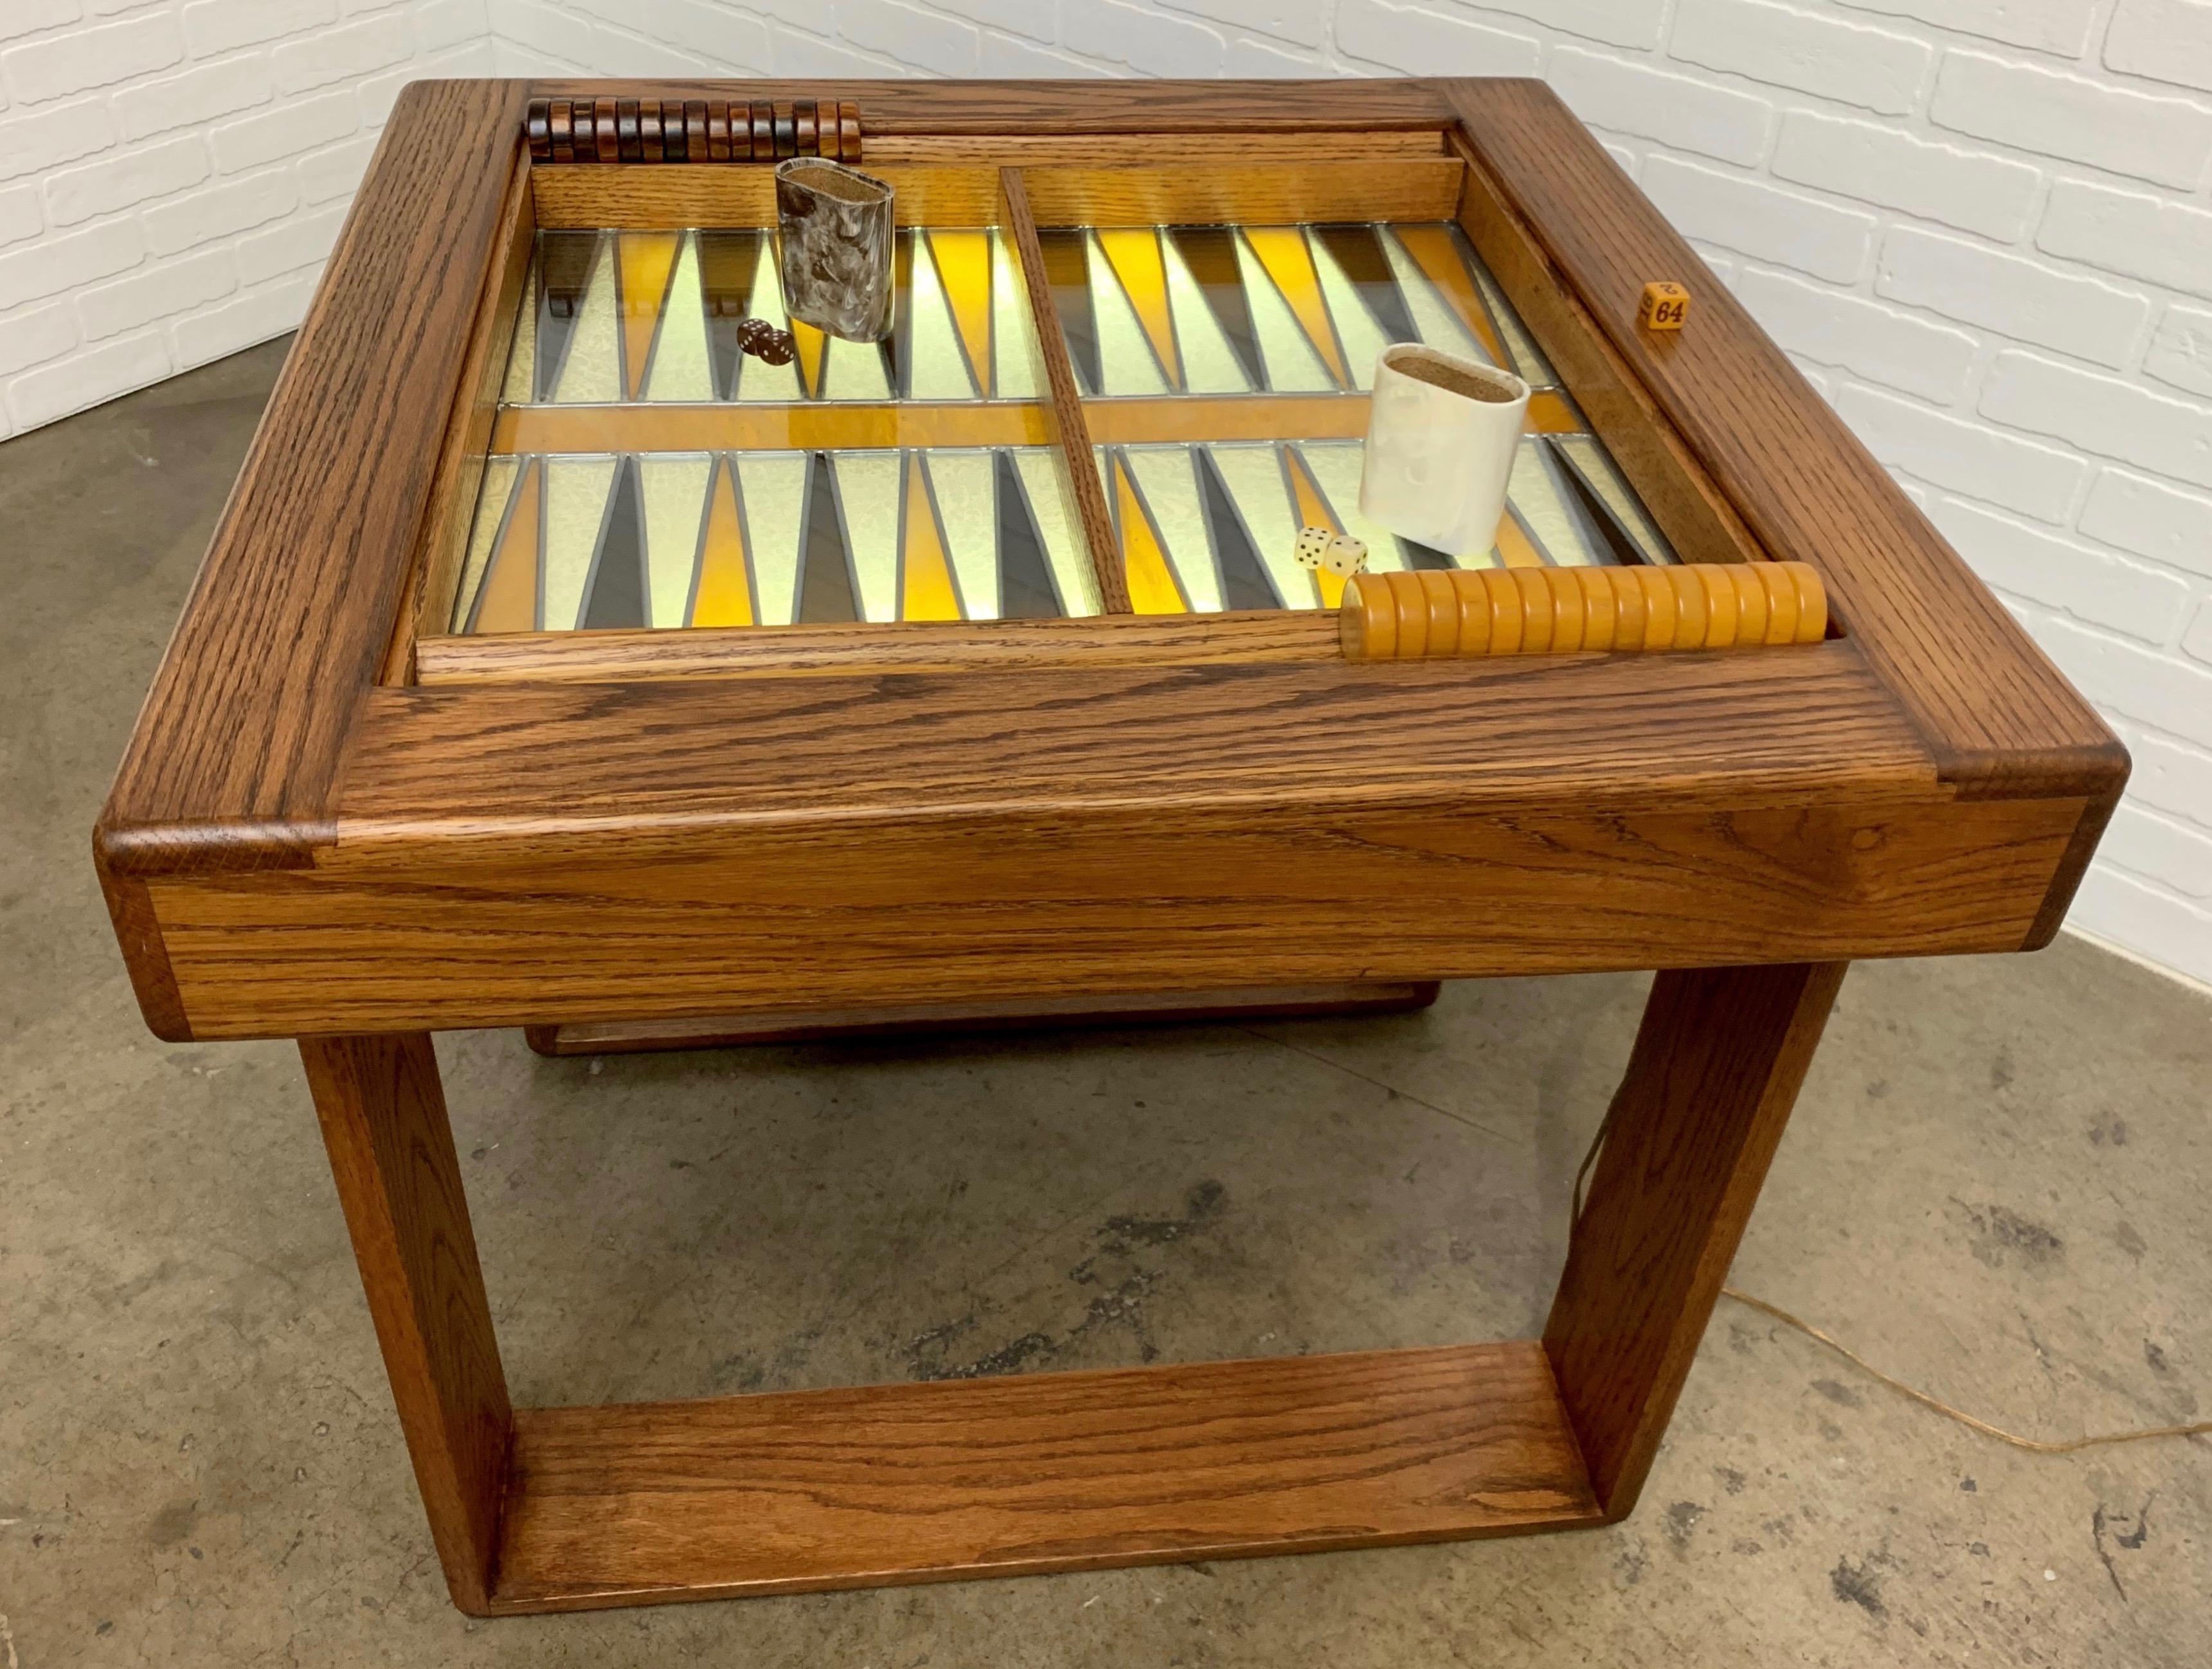 Modernist solid oak table in the style of Lou Hodges with lap joint and dowel construction and leaded glass backgammon board.
The glass surface is back lit for ambiance. Crisloid vintage game pieces included.